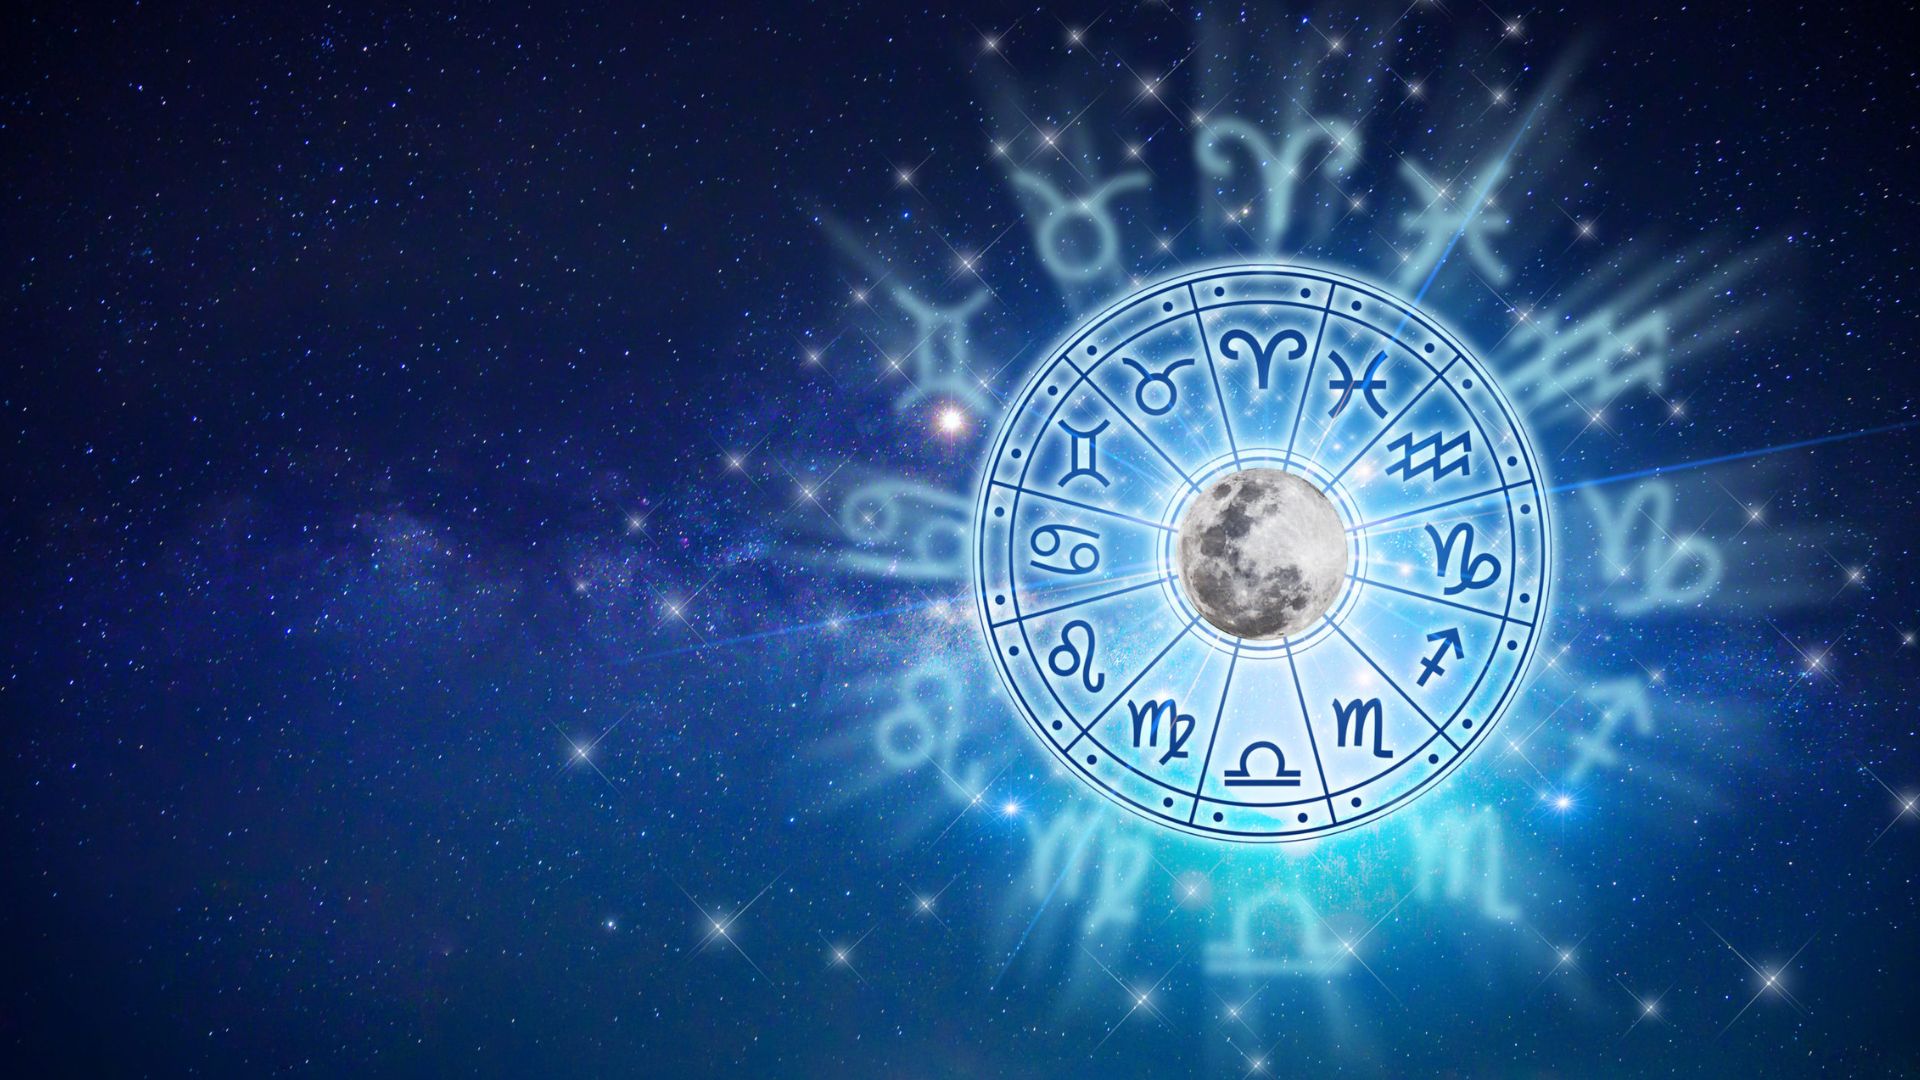 Zodiac Sign Around The Moon In Blue Sky